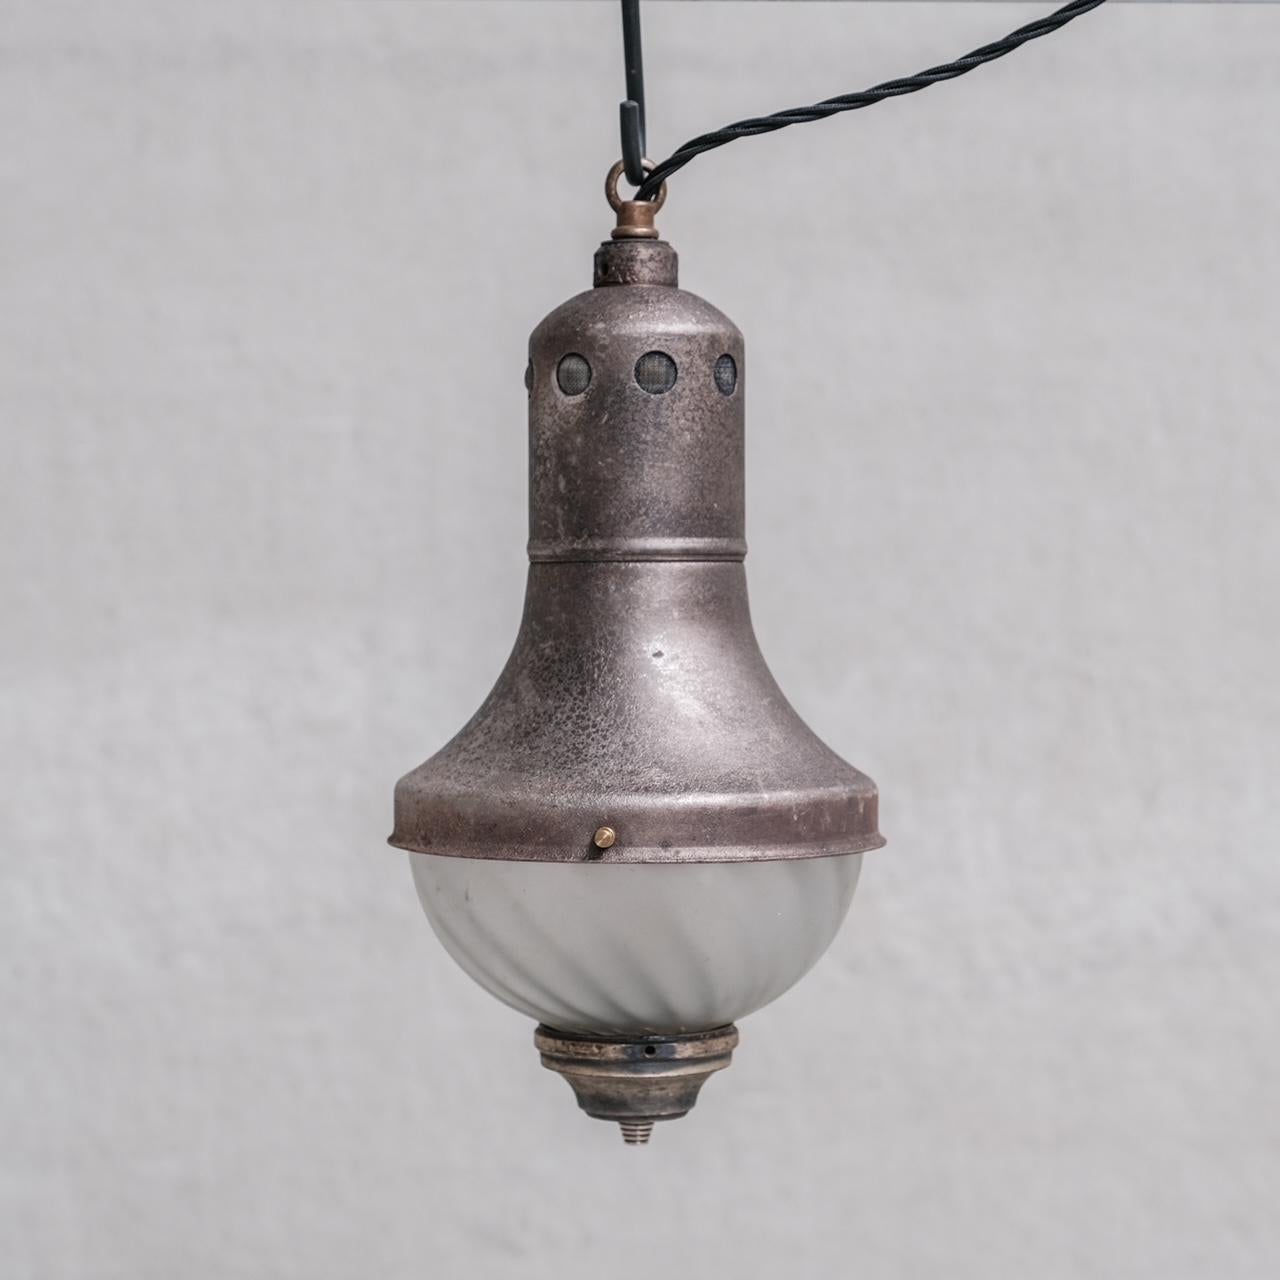 A set of three exceptional pendant lights. 

Patinated metal and opaque swirl glass. 

France, c1920s. 

PRICE IS FOR THE SET OF THREE. 

Since re-wired and PAT tested. 

No Additional Chain or Rose was retained so will not be provided. They can be